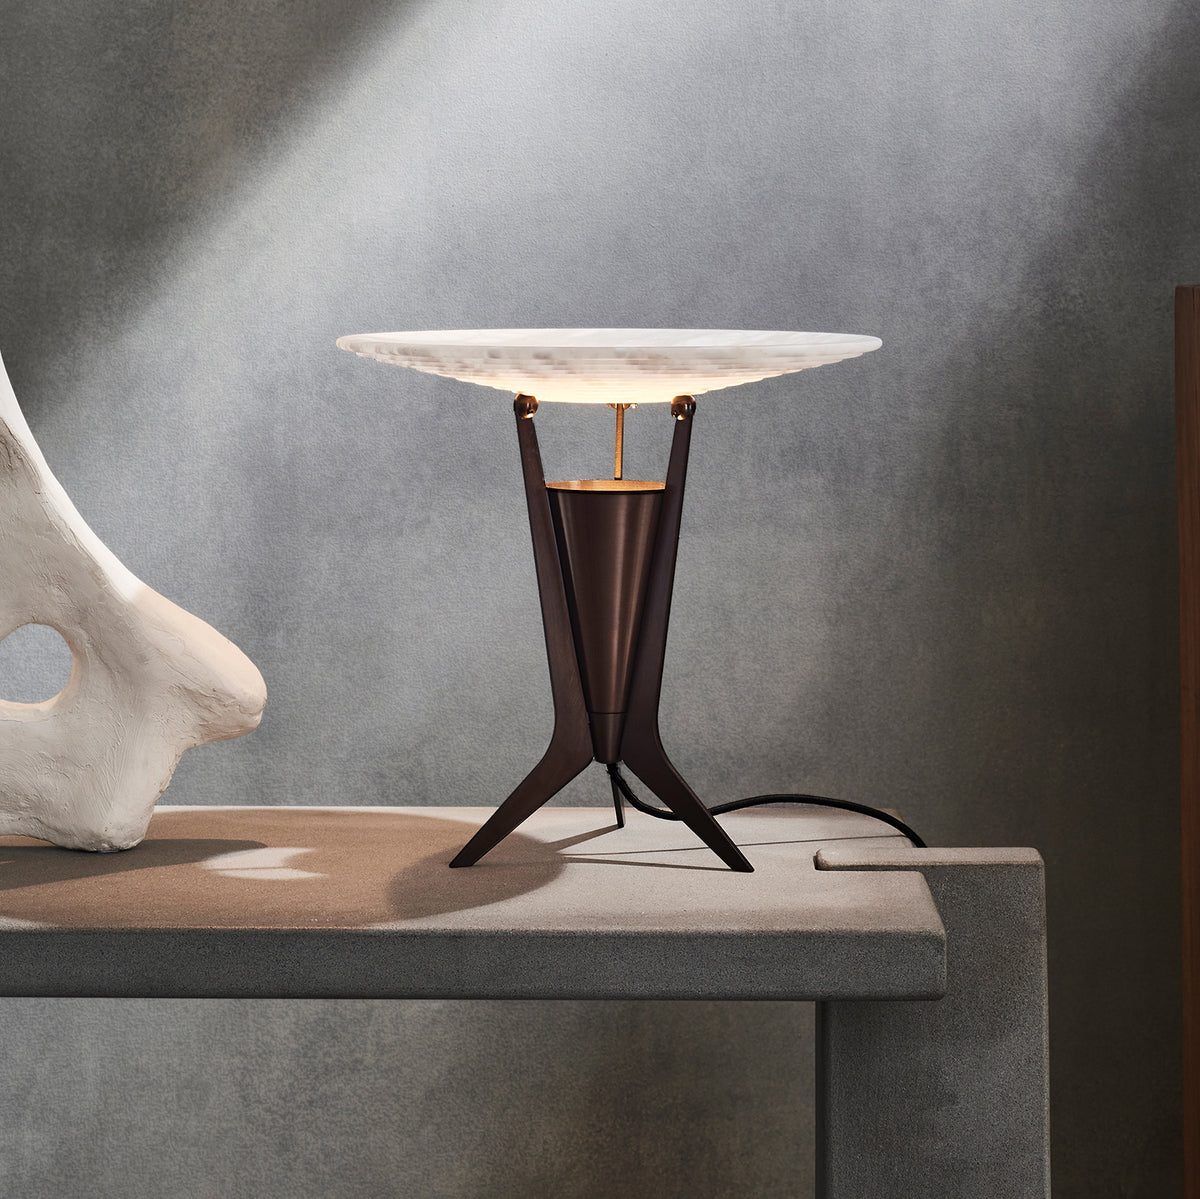 J Adams Aragon Table Light in bronze with alabaster stone